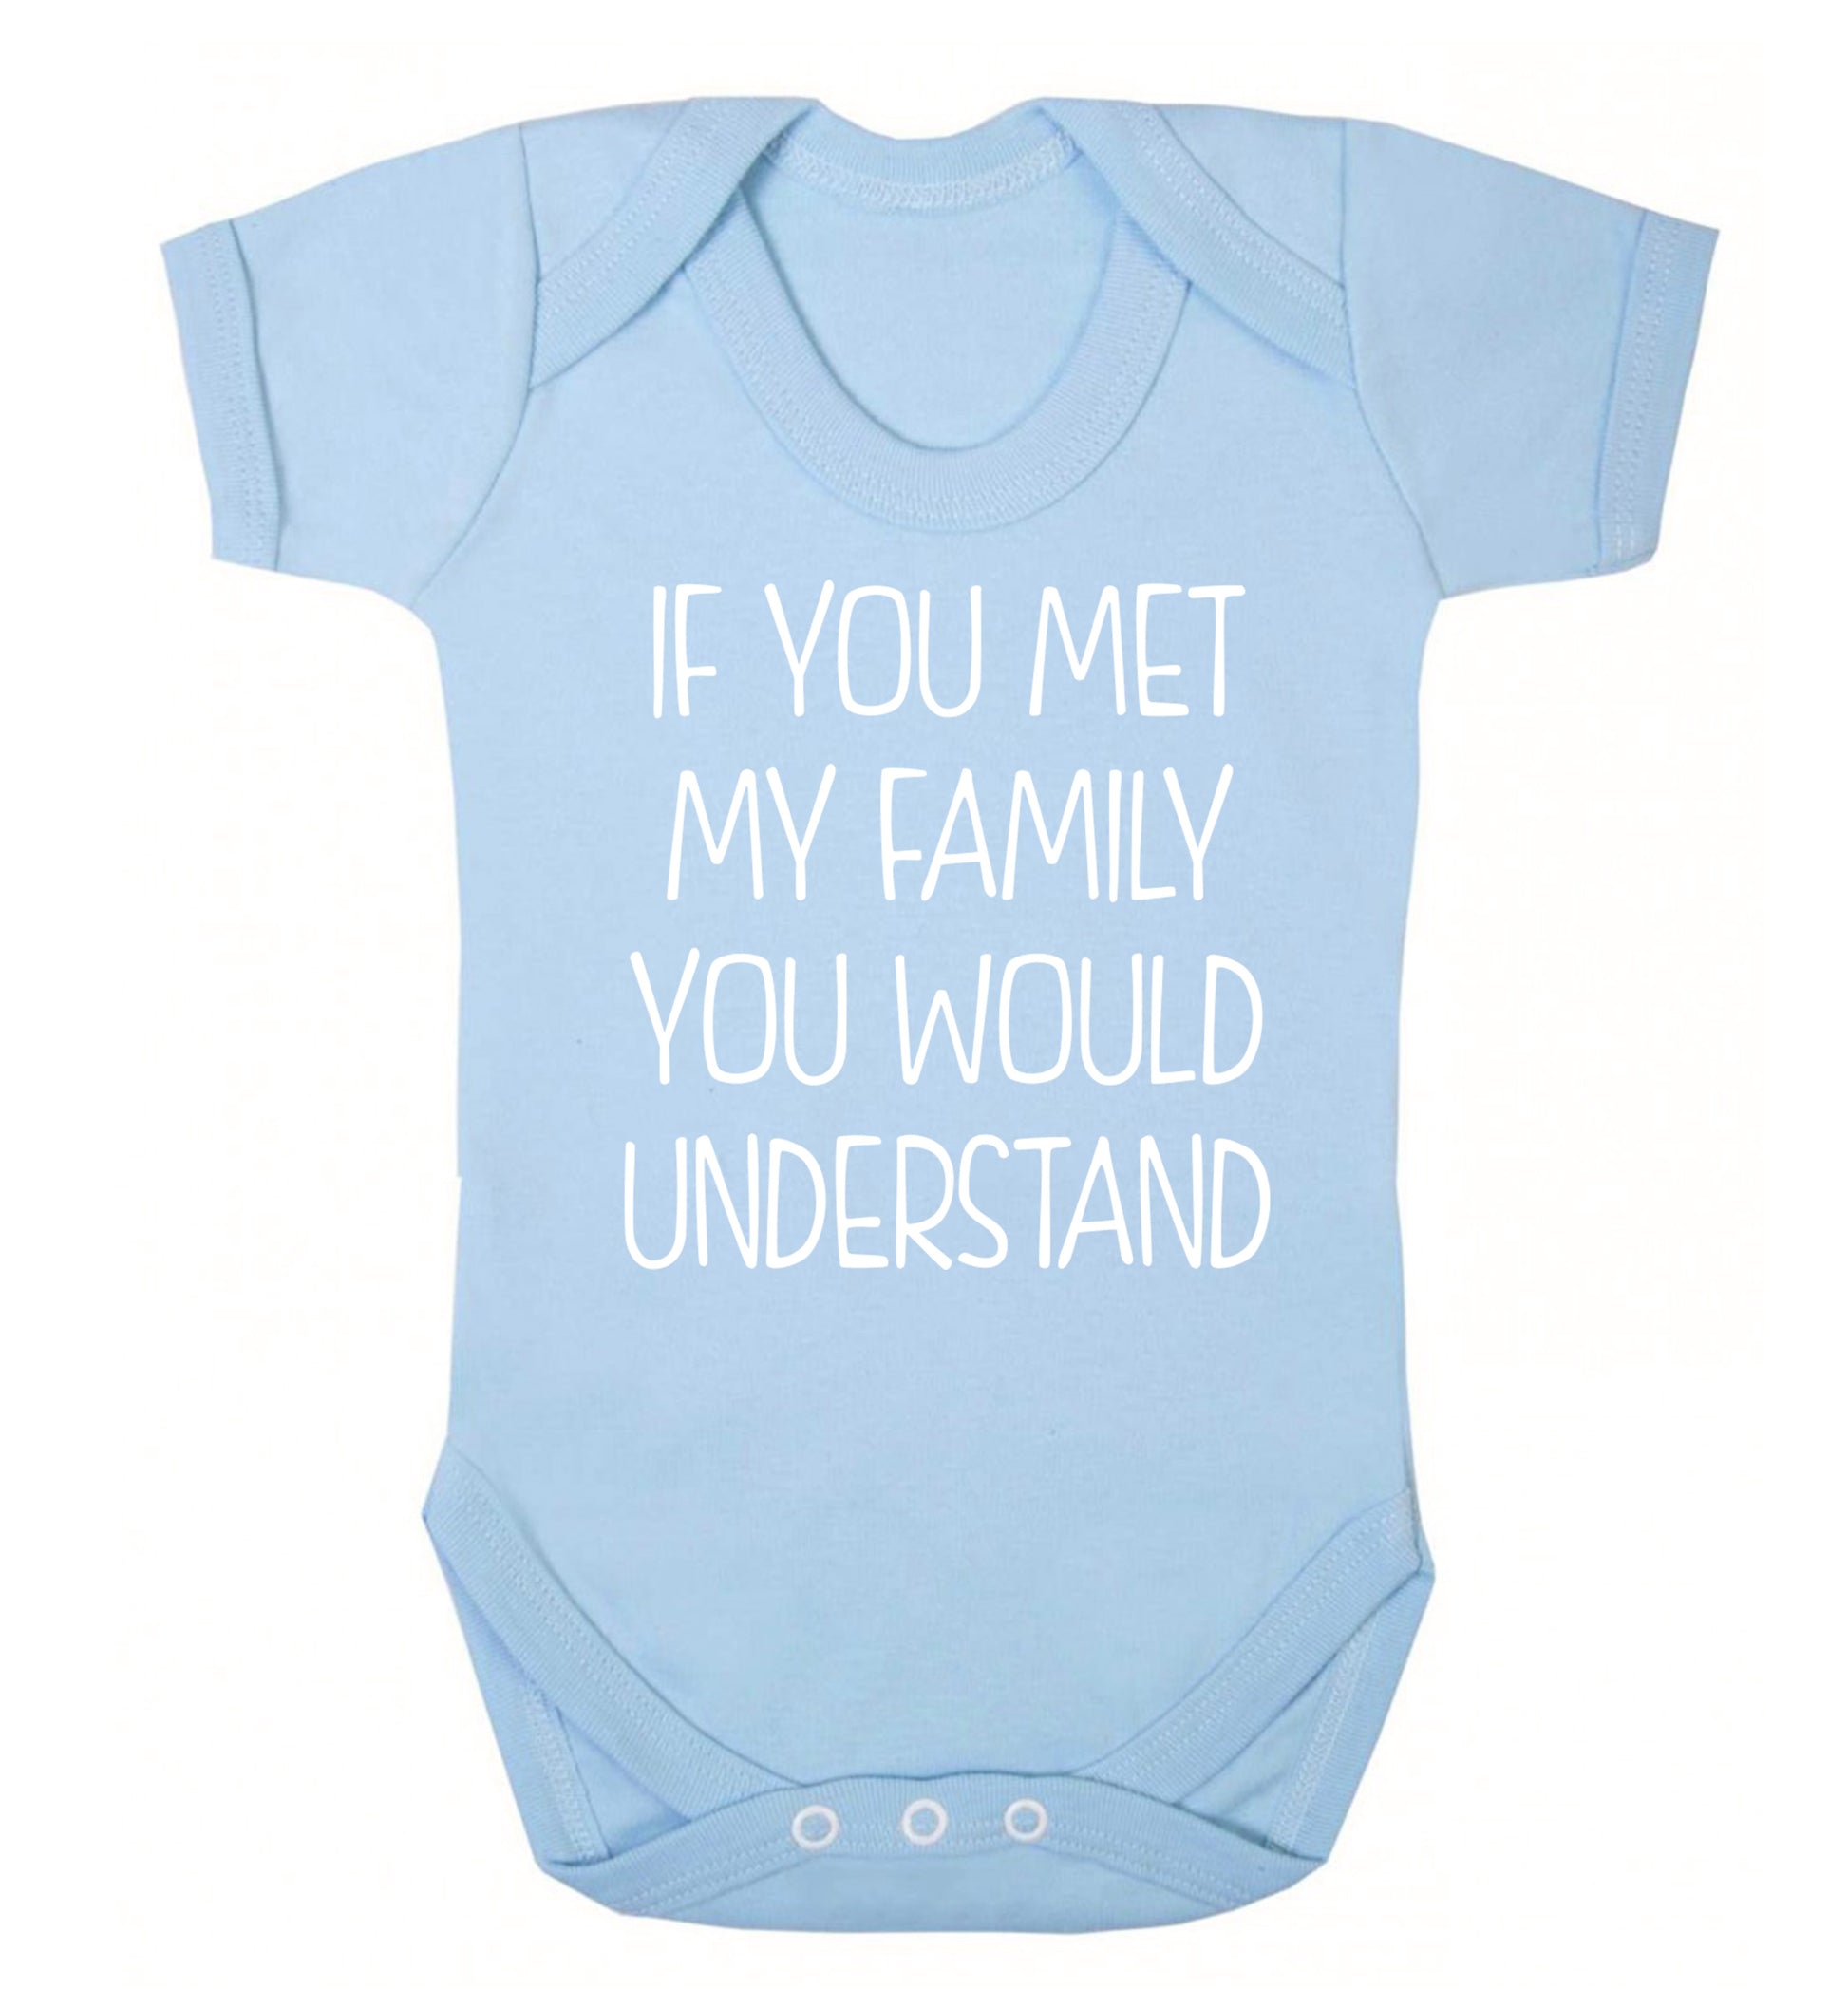 If you met my family you would understand Baby Vest pale blue 18-24 months